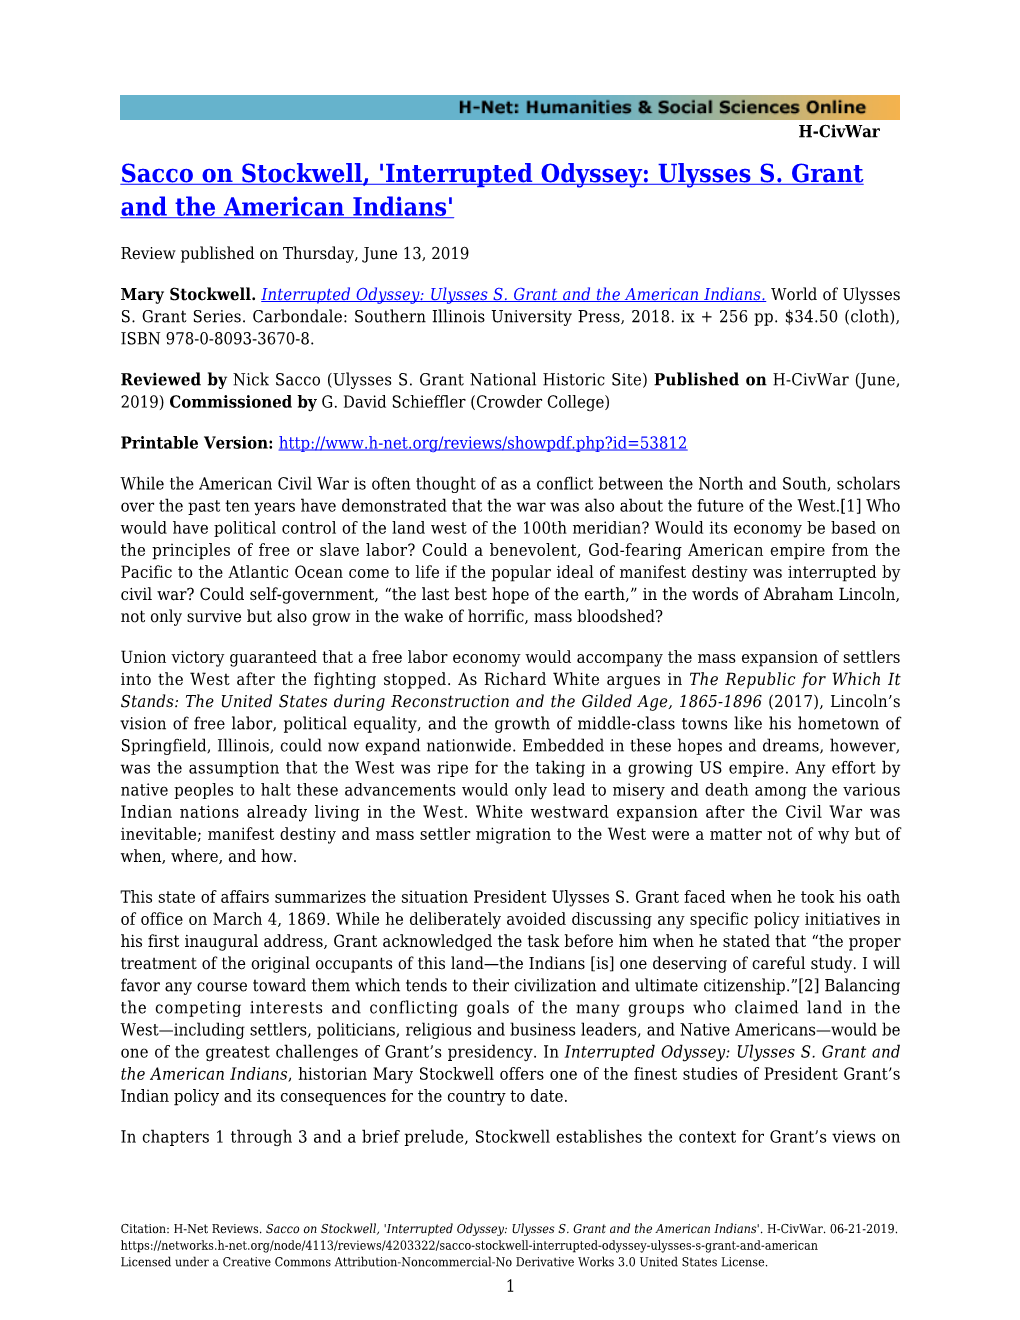 Interrupted Odyssey: Ulysses S. Grant and the American Indians'